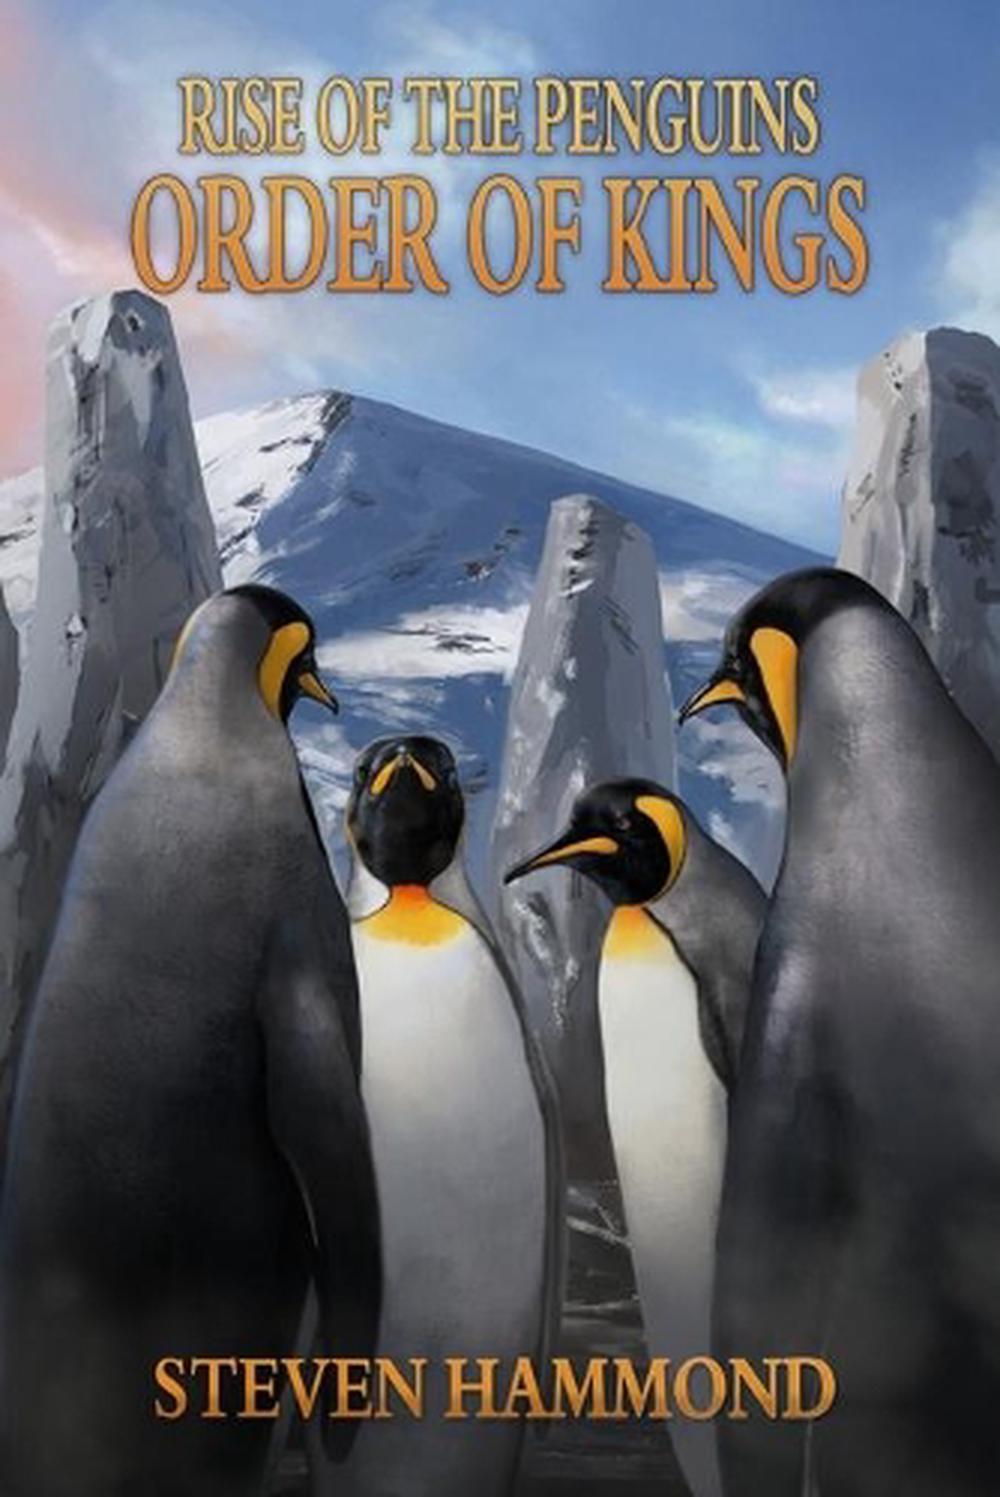 Rise of the Penguins by Steven Hammond